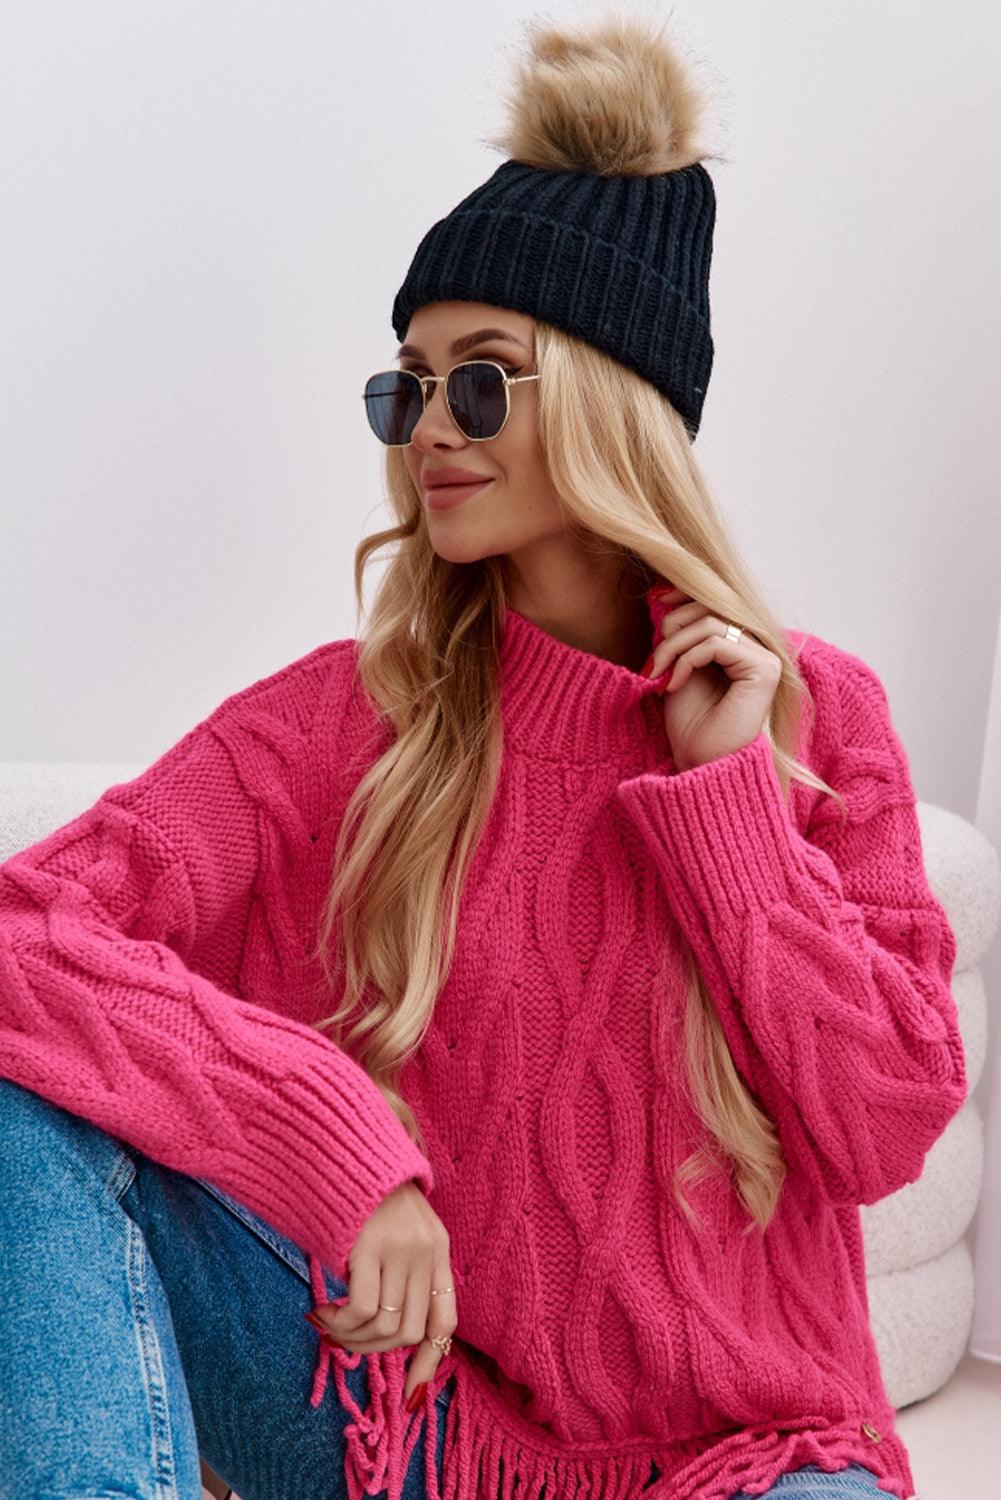 High Neck Cable Knit Tasseled Sweater - L & M Kee, LLC